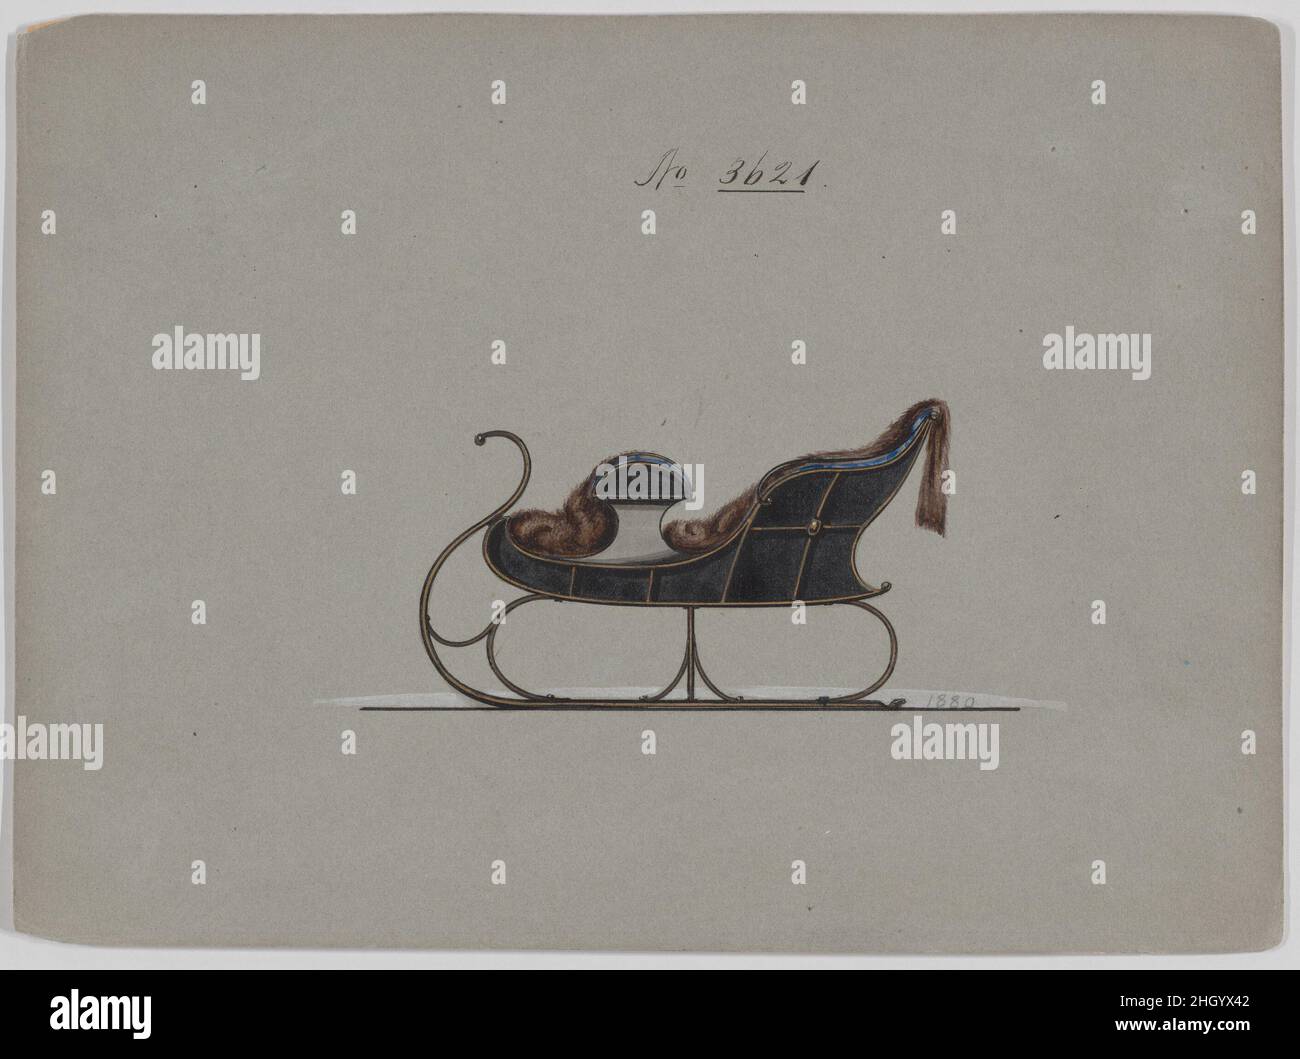 Design for 4 Seat Sleigh, no. 3621 1880 Brewster & Co. American Brewster & Company HistoryEstablished in 1810 by James Brewster (1788–1866) in New Haven, Connecticut, Brewster & Company, specialized in the manufacture of fine carriages. The founder opened a New York showroom in 1827 at 53-54 Broad Street, and the company flourished under generations of family leadership. Expansion necessitated moves around lower Manhattan, with name changes reflecting shifts of management–James Brewster & Sons operated at 25 Canal Street, James Brewster Sons at 396 Broadway, and Brewster of Broome Street was b Stock Photo